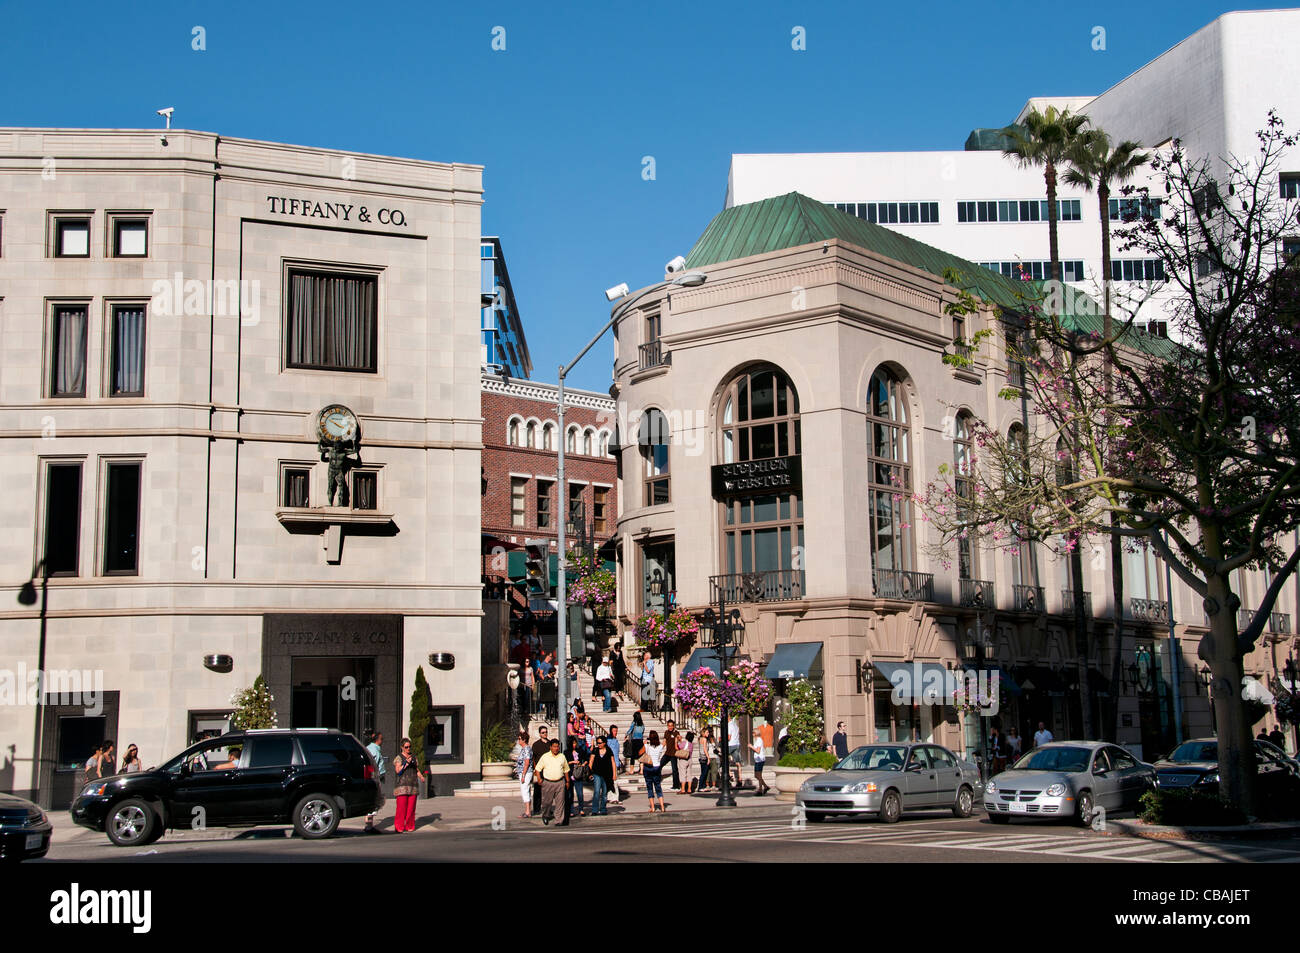 Tiffany Jewellery Boutiques boutiques de Rodeo Drive à Beverly Hills, Los Angeles California United States Banque D'Images